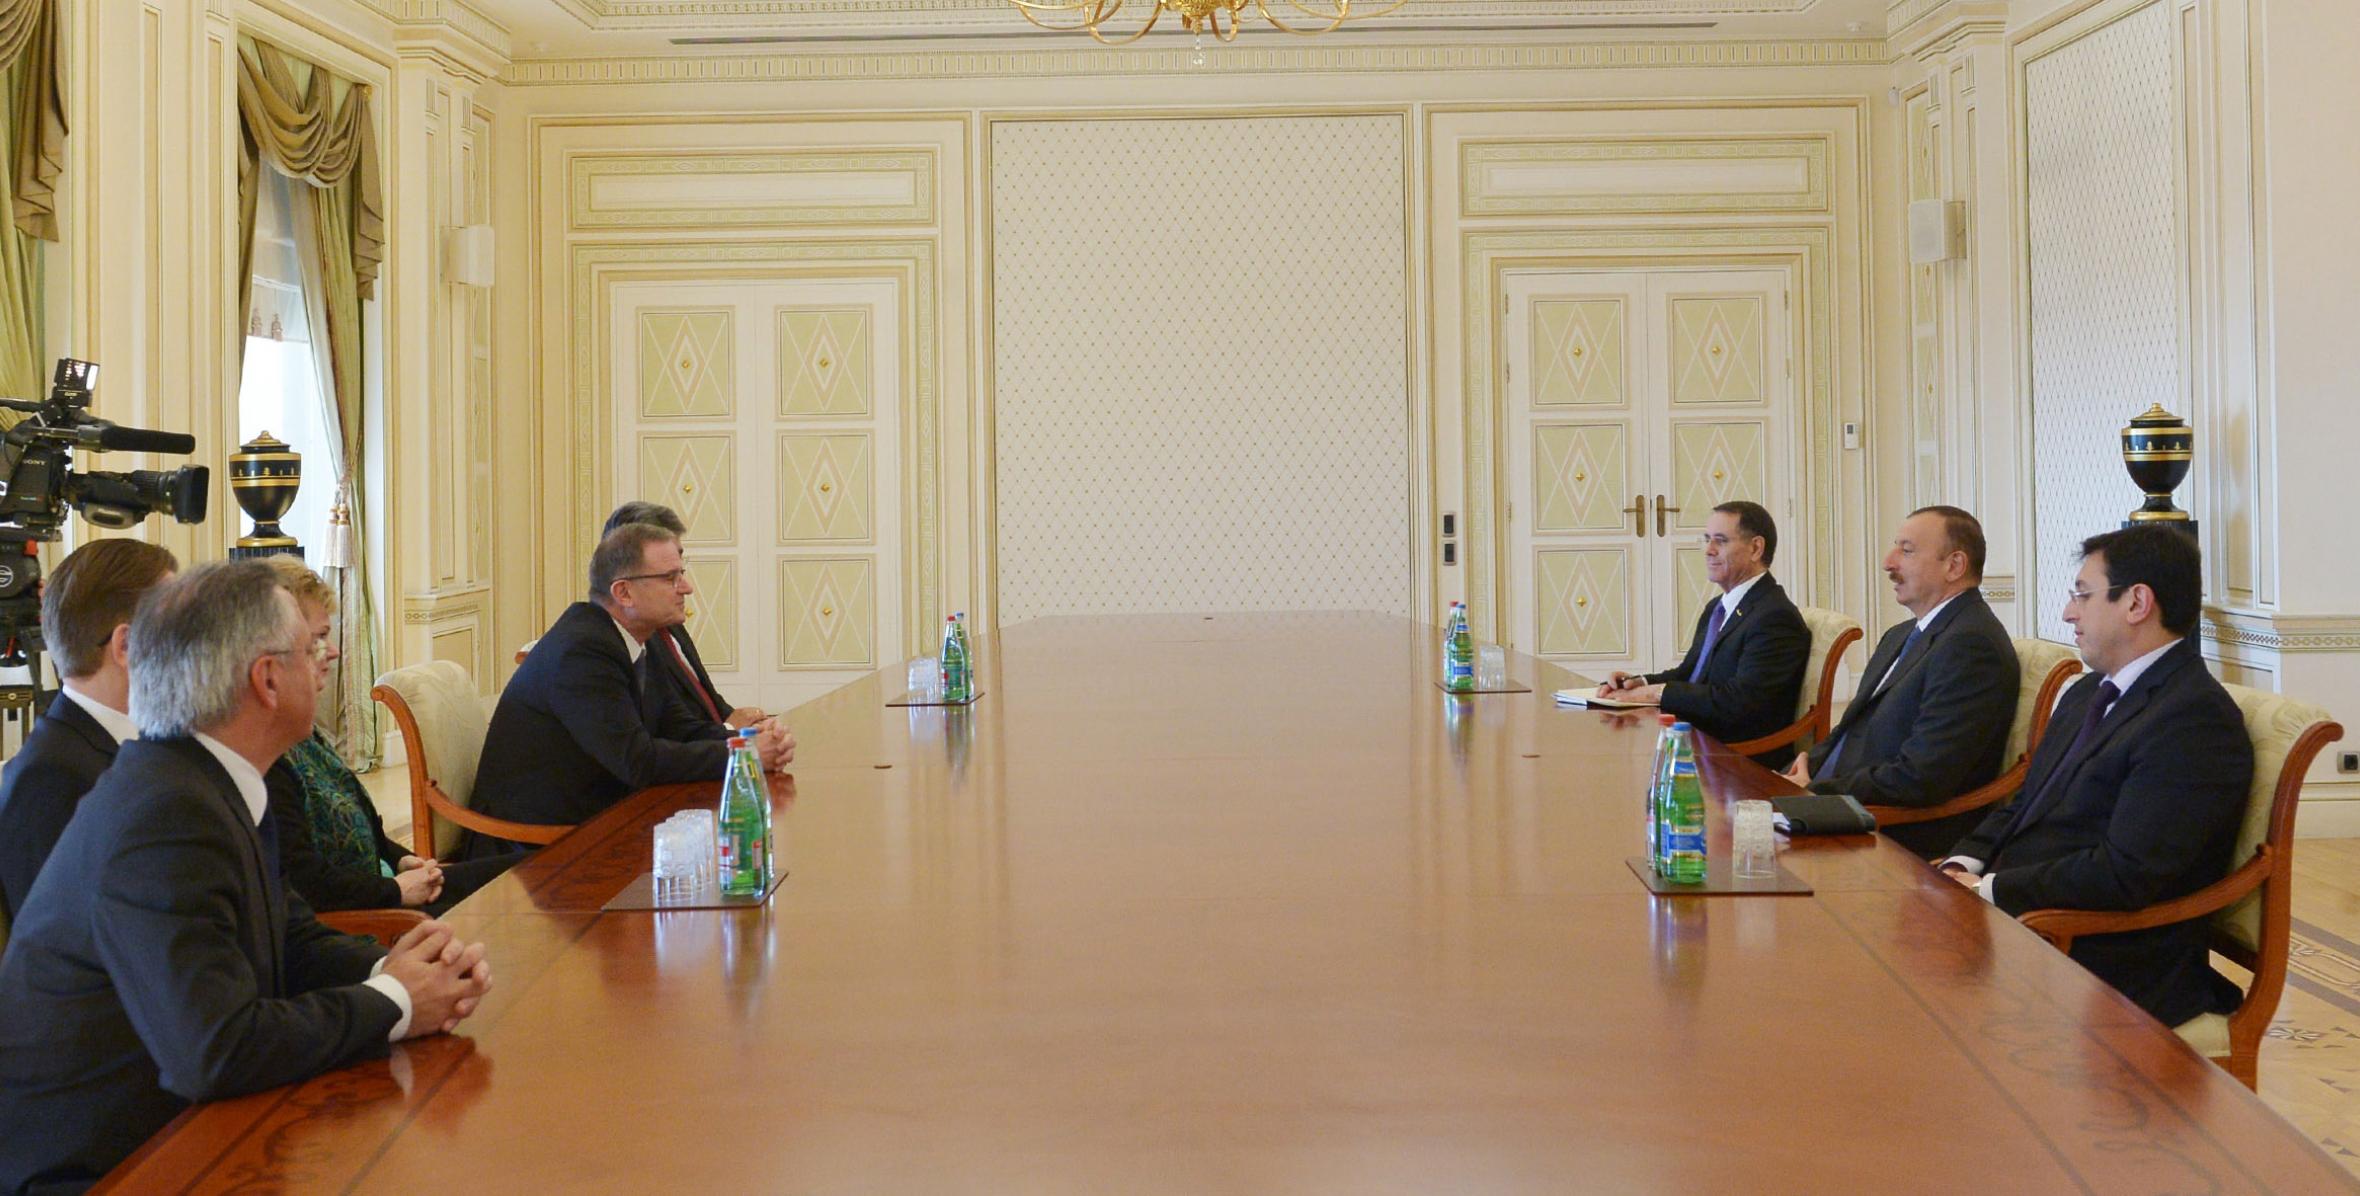 Ilham Aliyev received a delegation led by the Second President of the Austrian Parliament